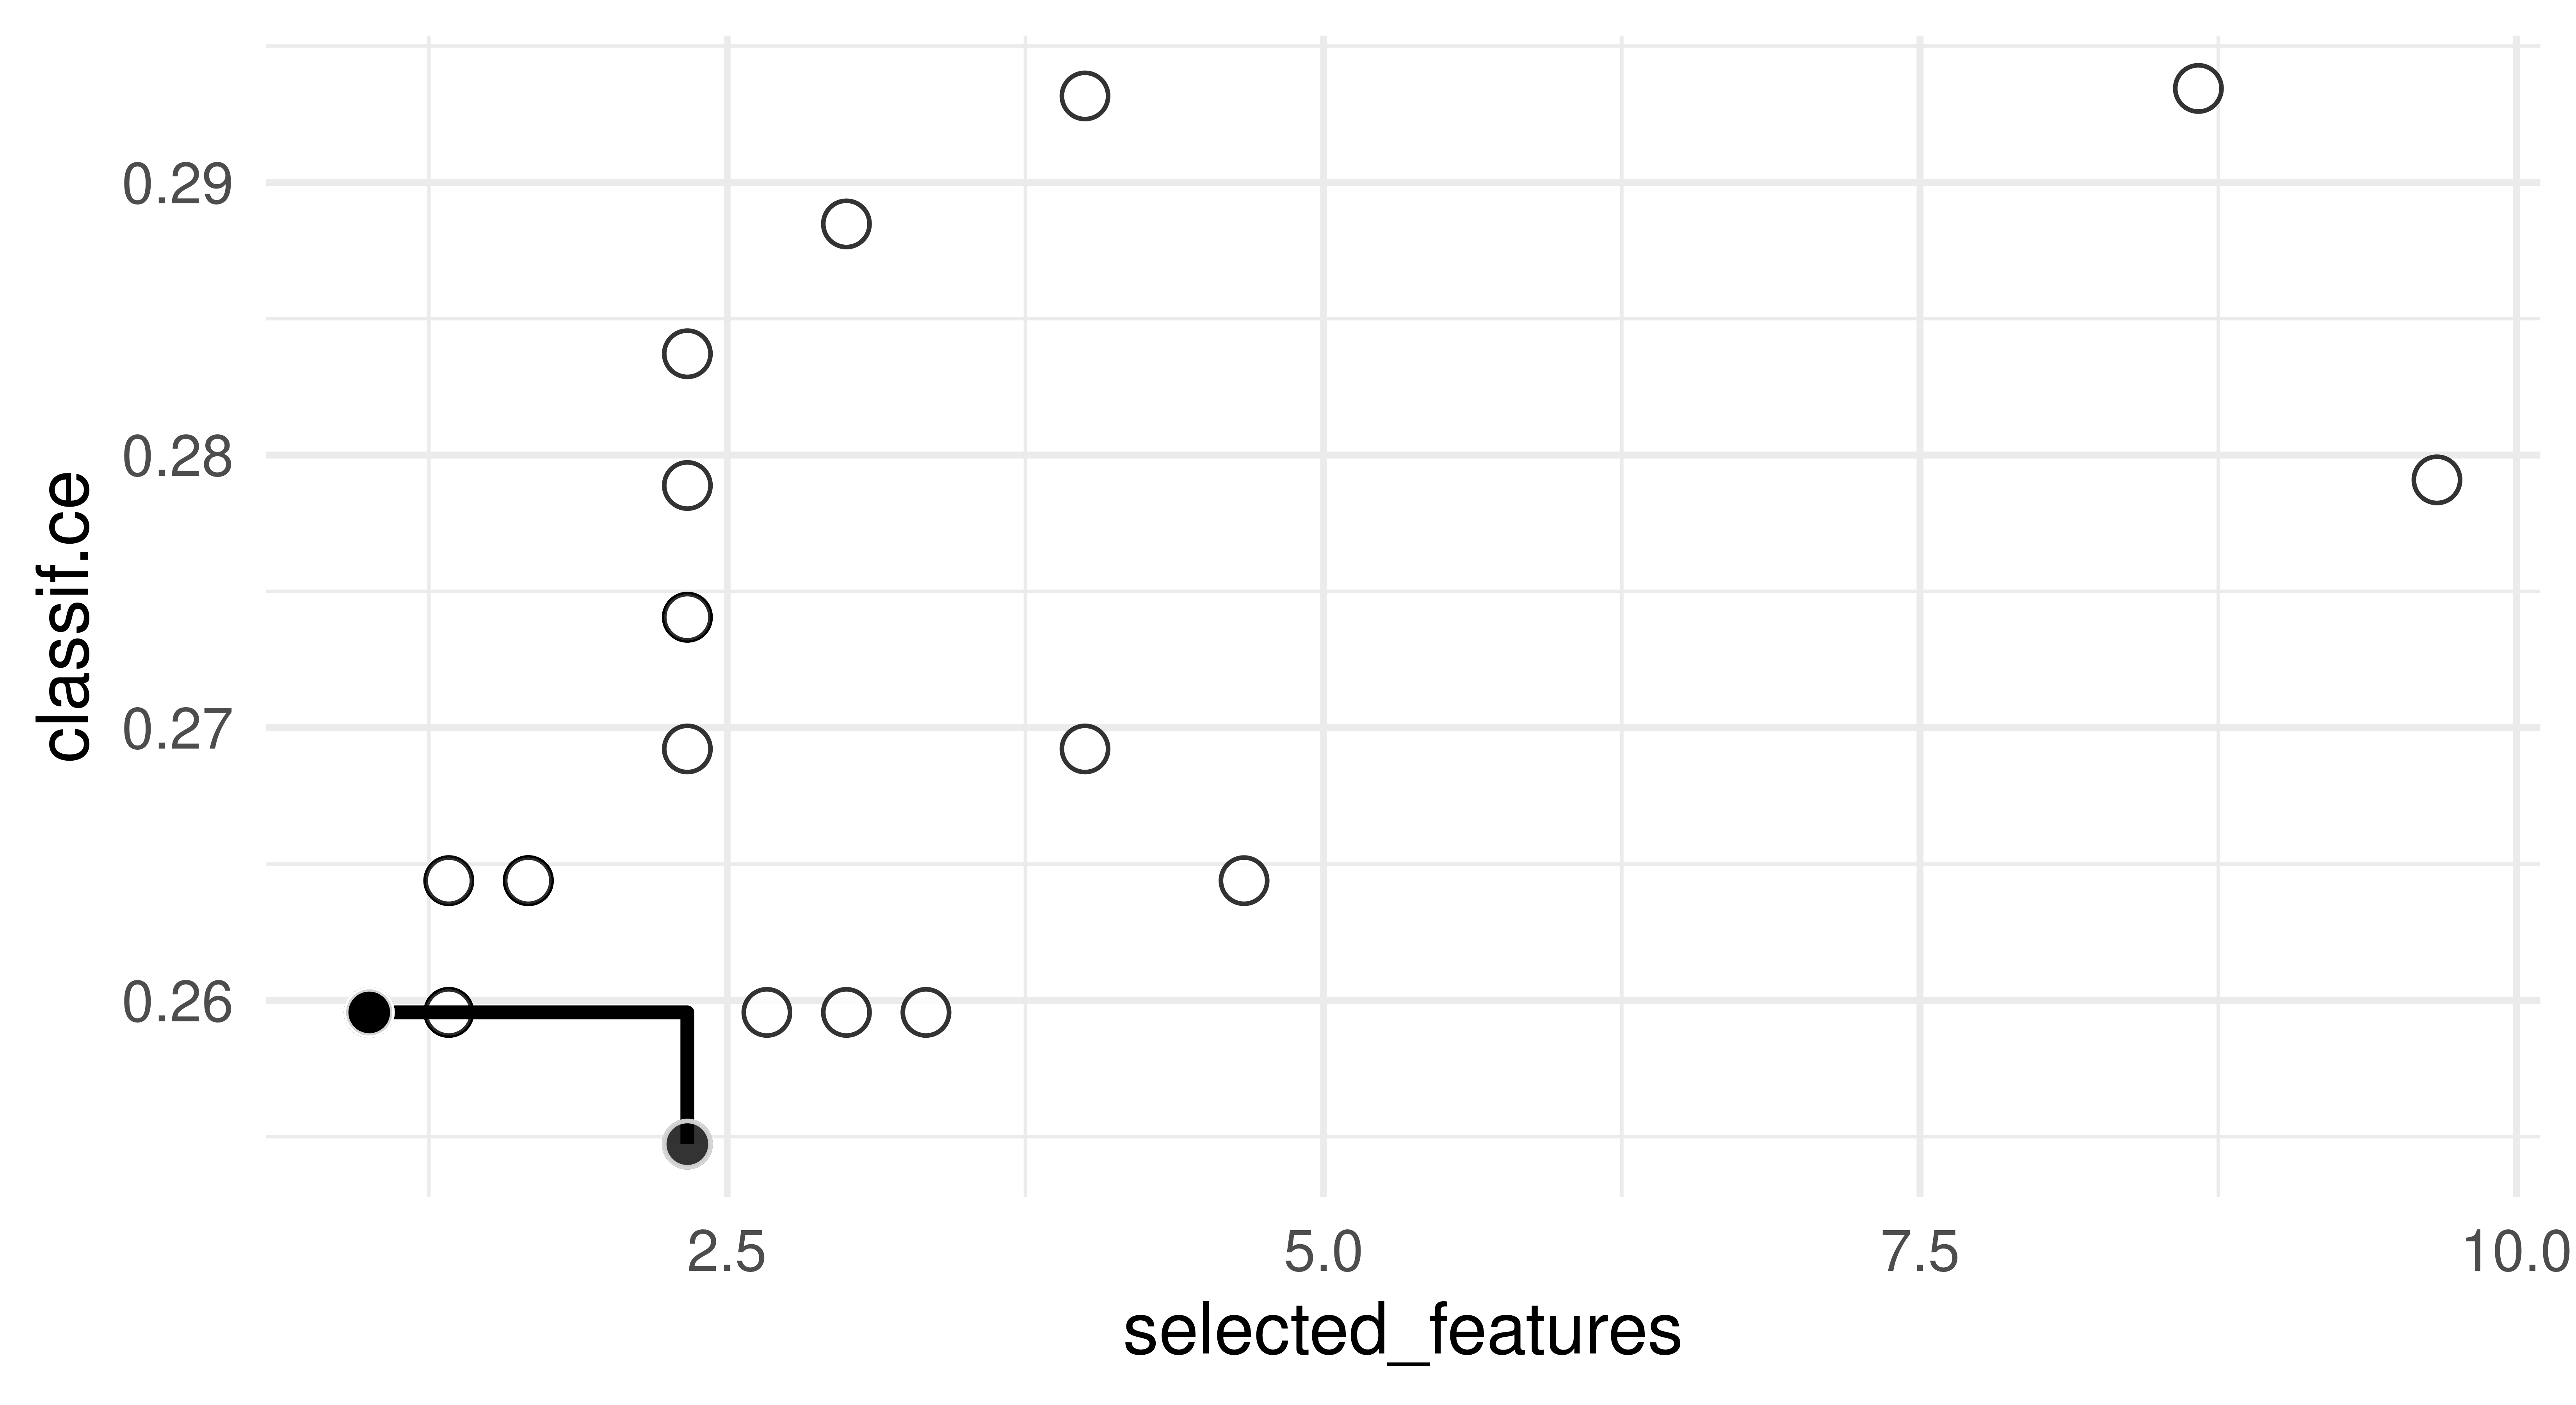 Scatter plot with selected_features on x-axis and classif.ce on y-axis. Plot shows around 15 white dots and two black dots joined by a line at roughly (1, 0.26) and (2.5, 0.25).